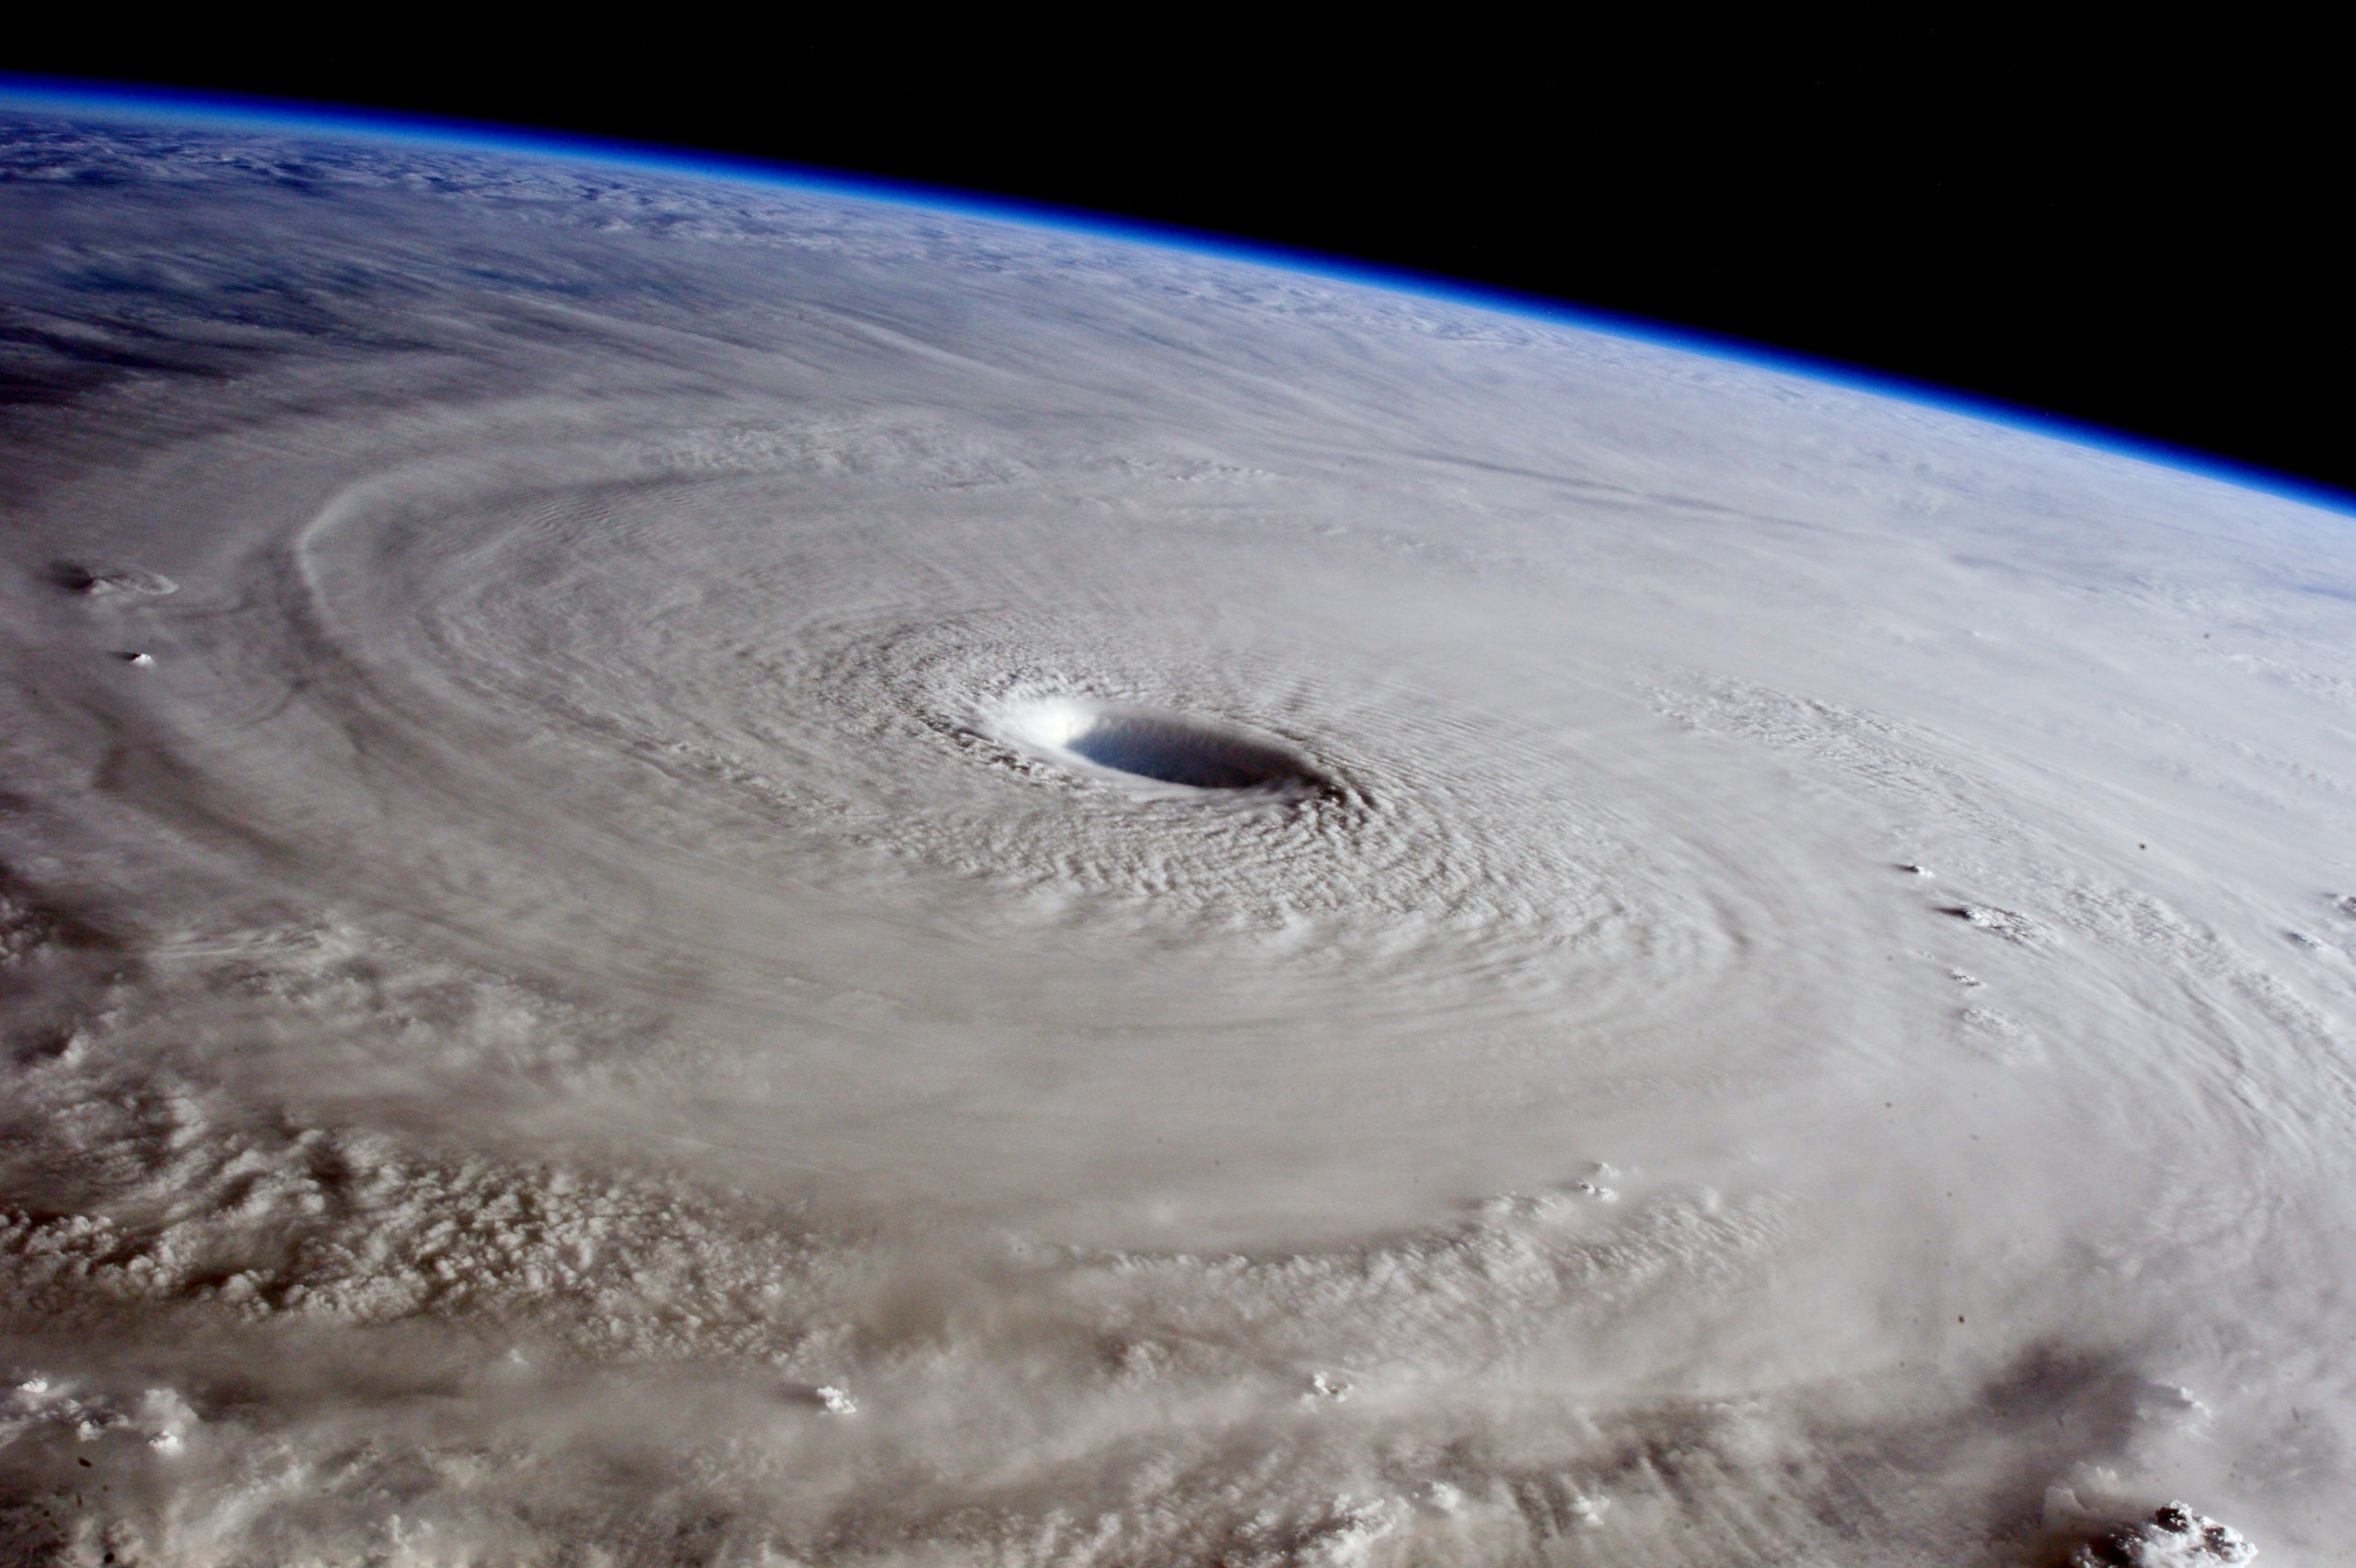 Not War, but a Hurricane: A Better Analogy for COVID-19 and Pandemics